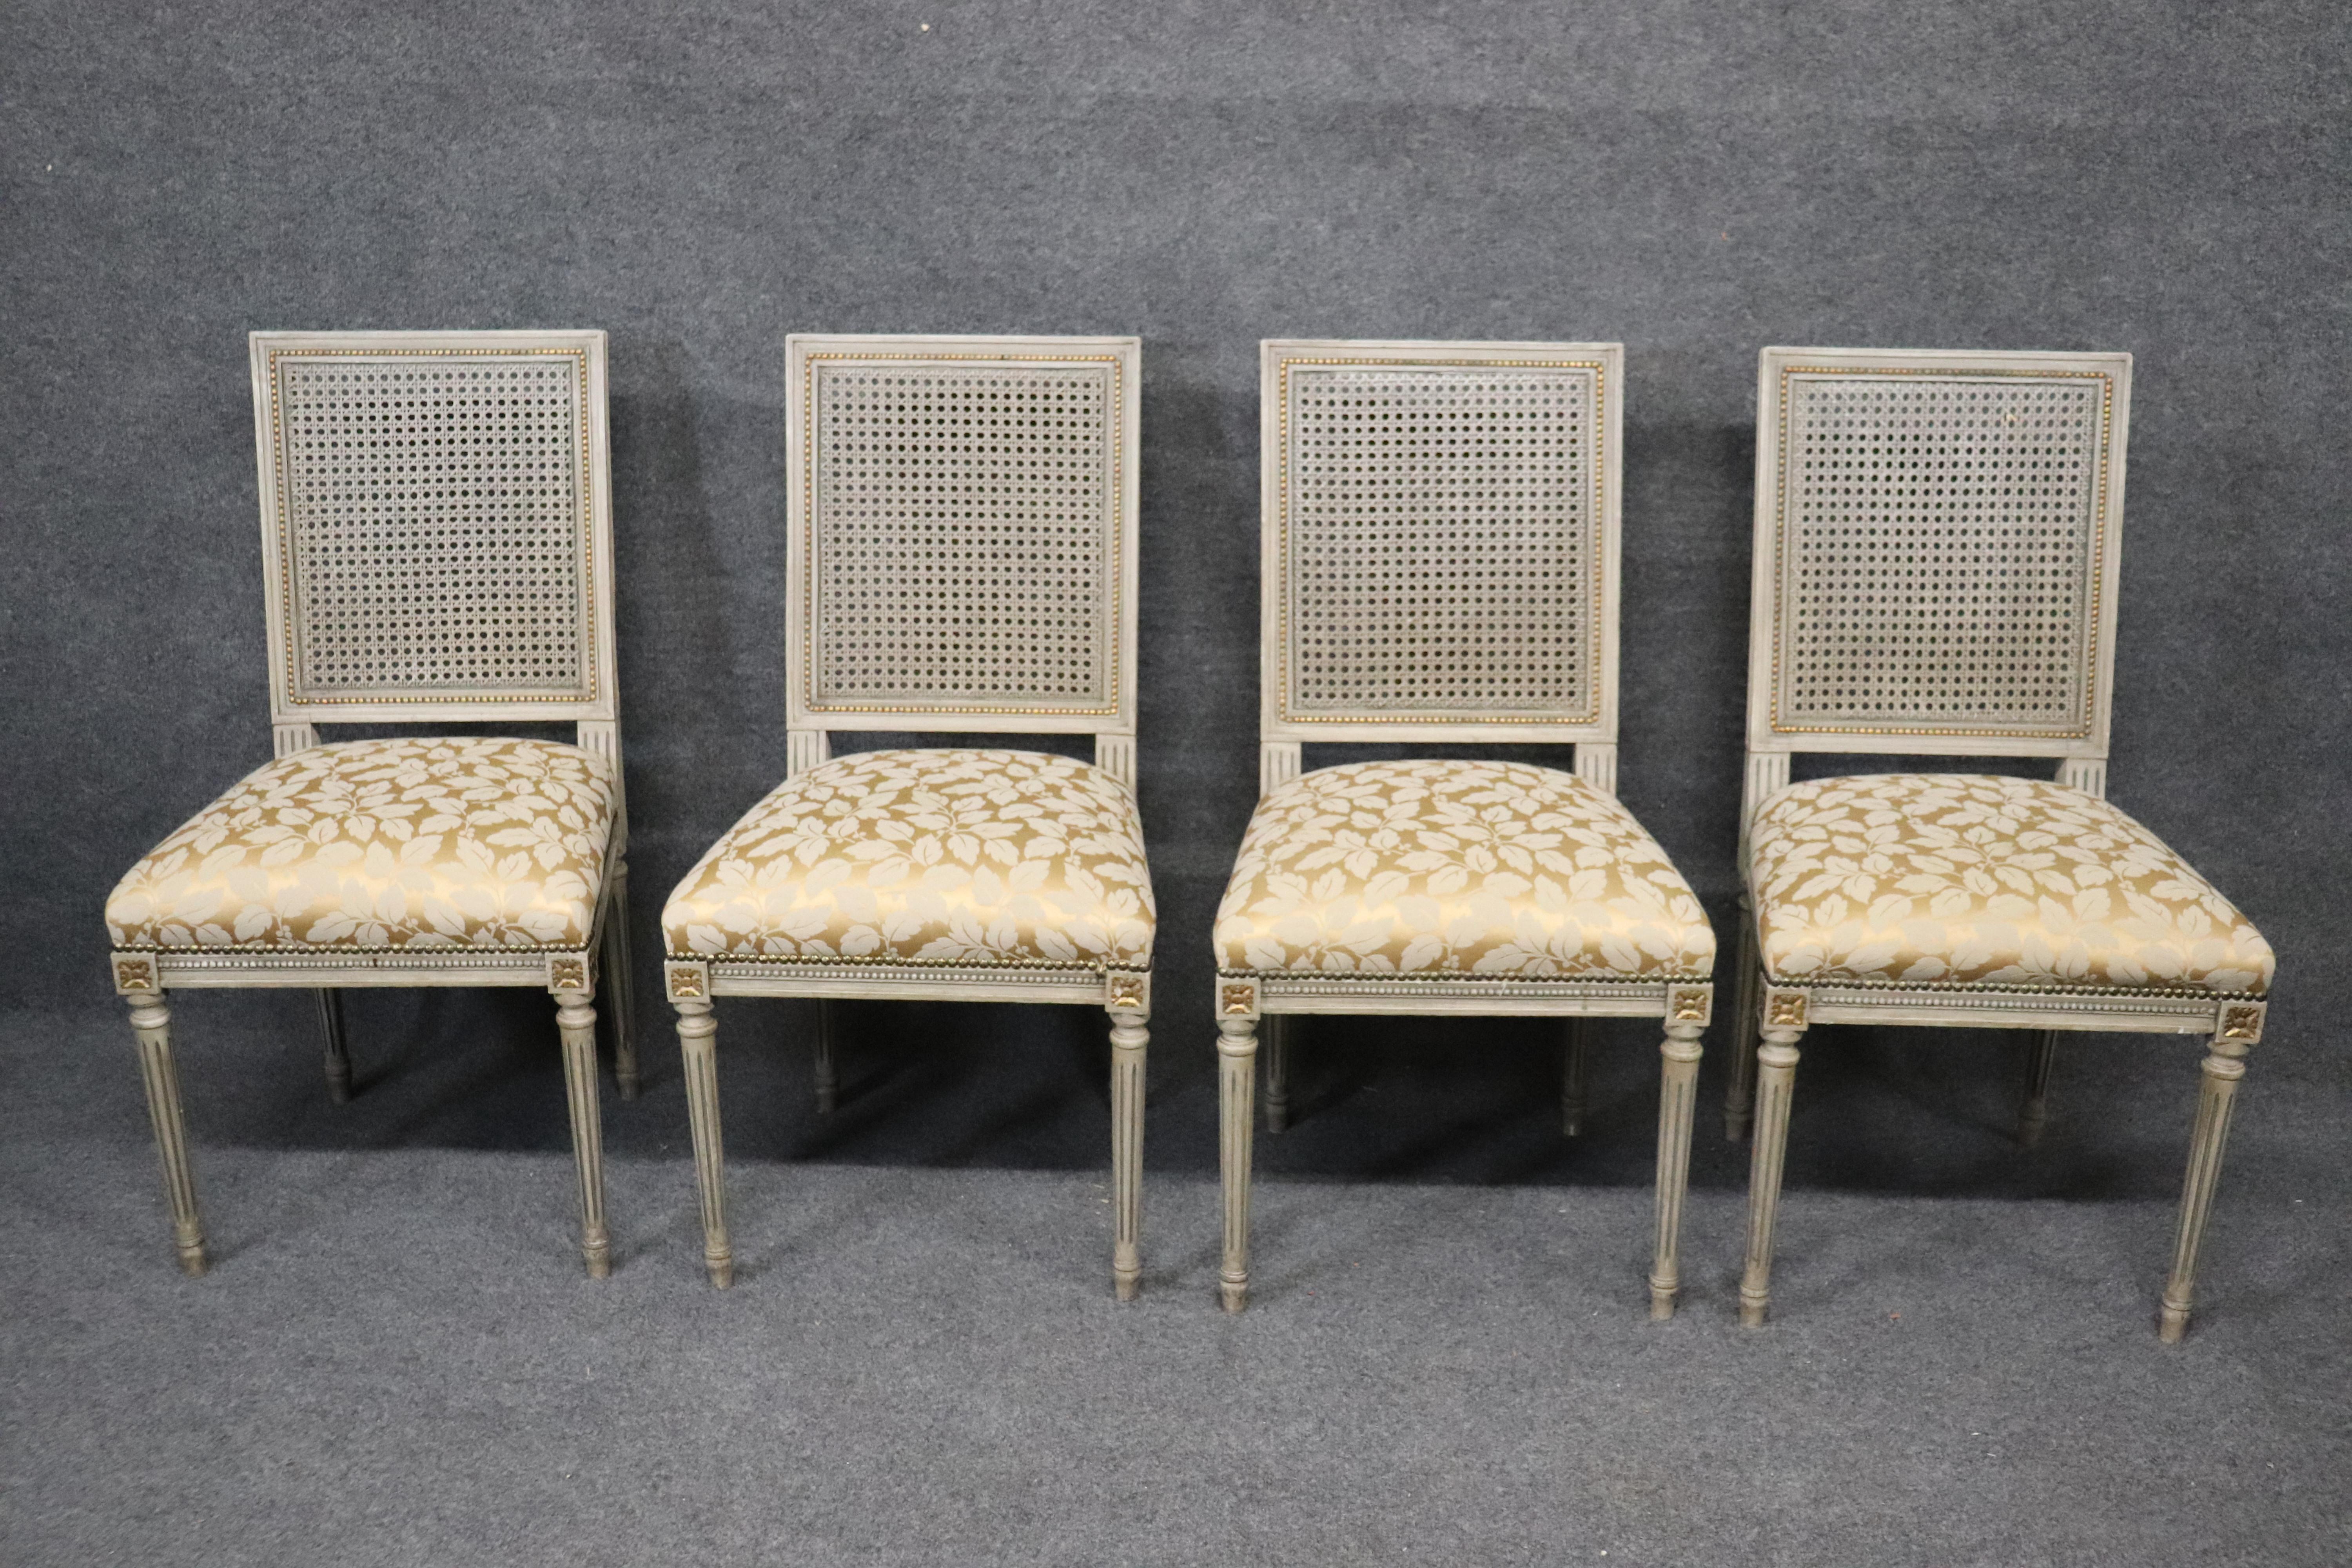 This is a wonderful set of Maison Jansen style Louis XVI dining chairs. The set is in very good condition with good cane backs and beautifully painted frames and subtle gilt details. The chairs date to the 1920s and measure 37 tall x 19 wide x 20